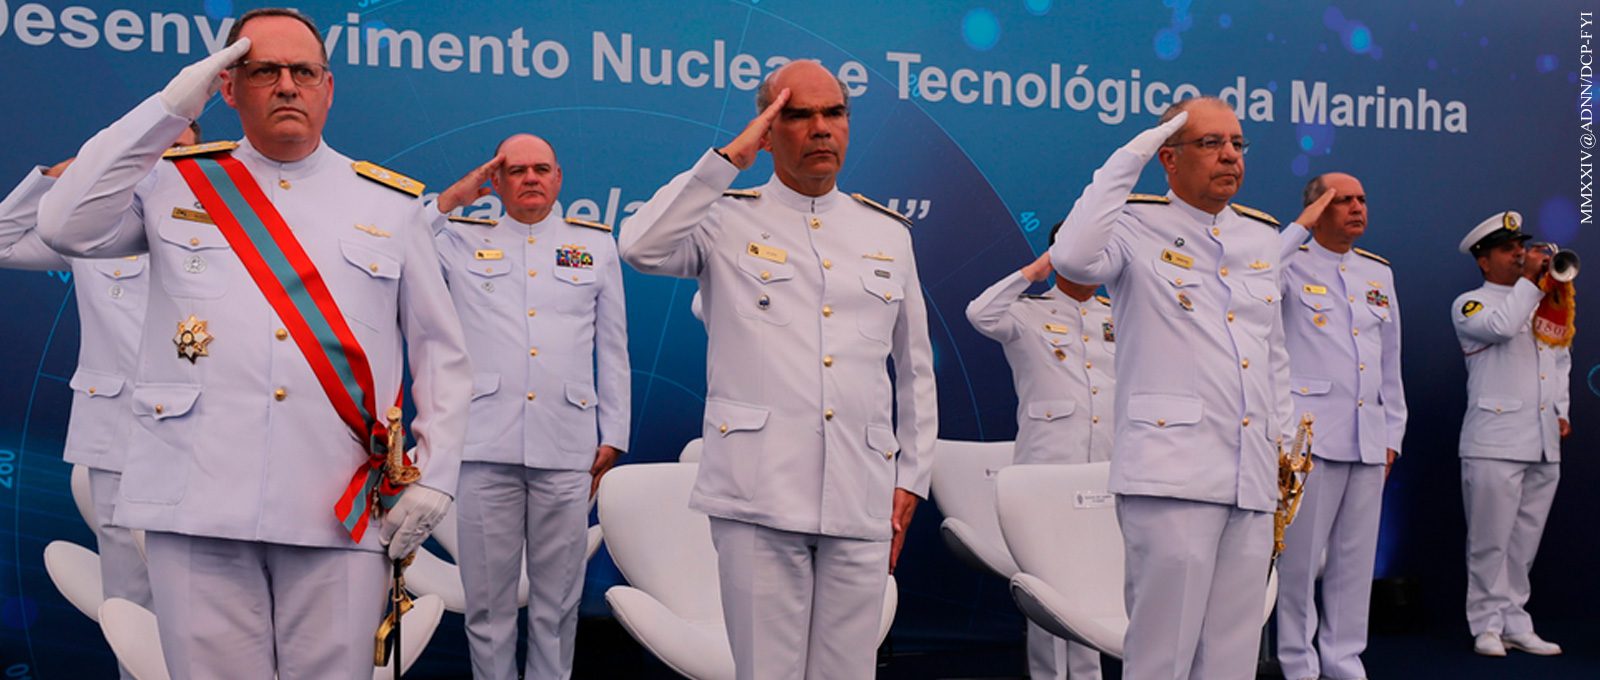 Brazilian Navy has new Director General for Nuclear and Technological Development